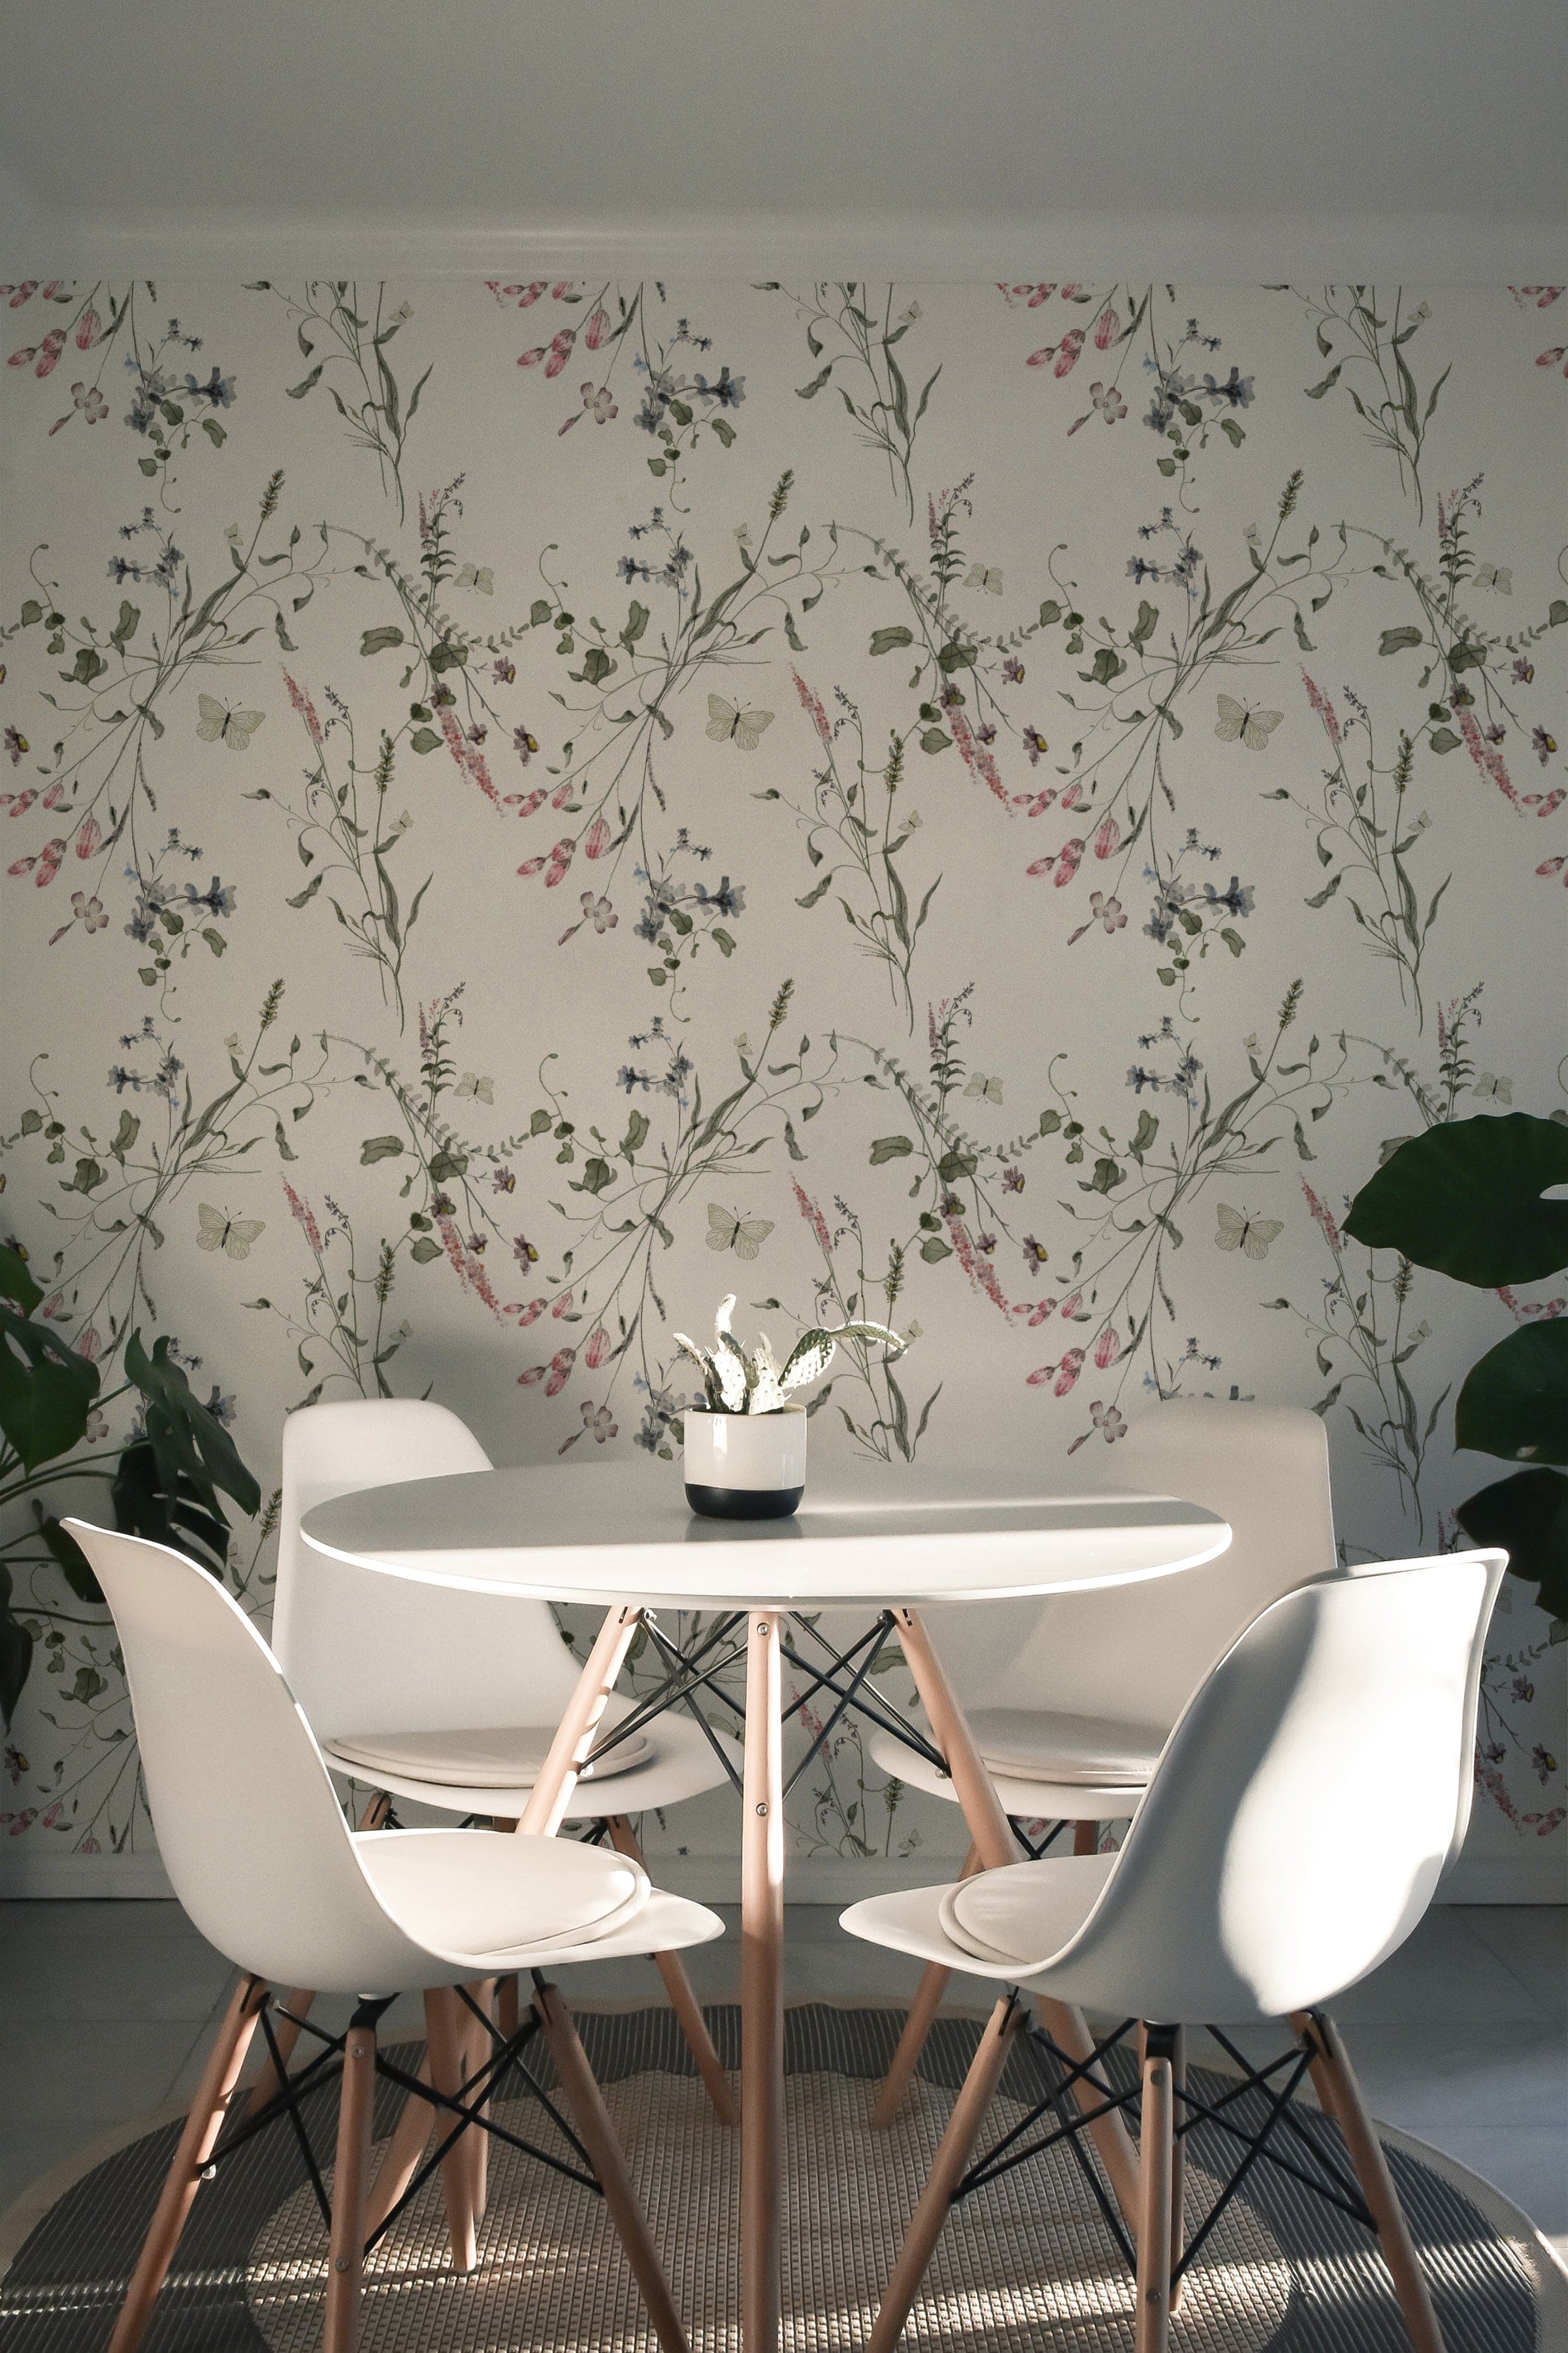 A modern dining area adorned with the Lovely Botanicals Wallpaper, which brings a fresh, natural vibe to the space. The light floral patterns provide a soft background for the sleek white table and chairs, enhancing the room’s contemporary aesthetic.